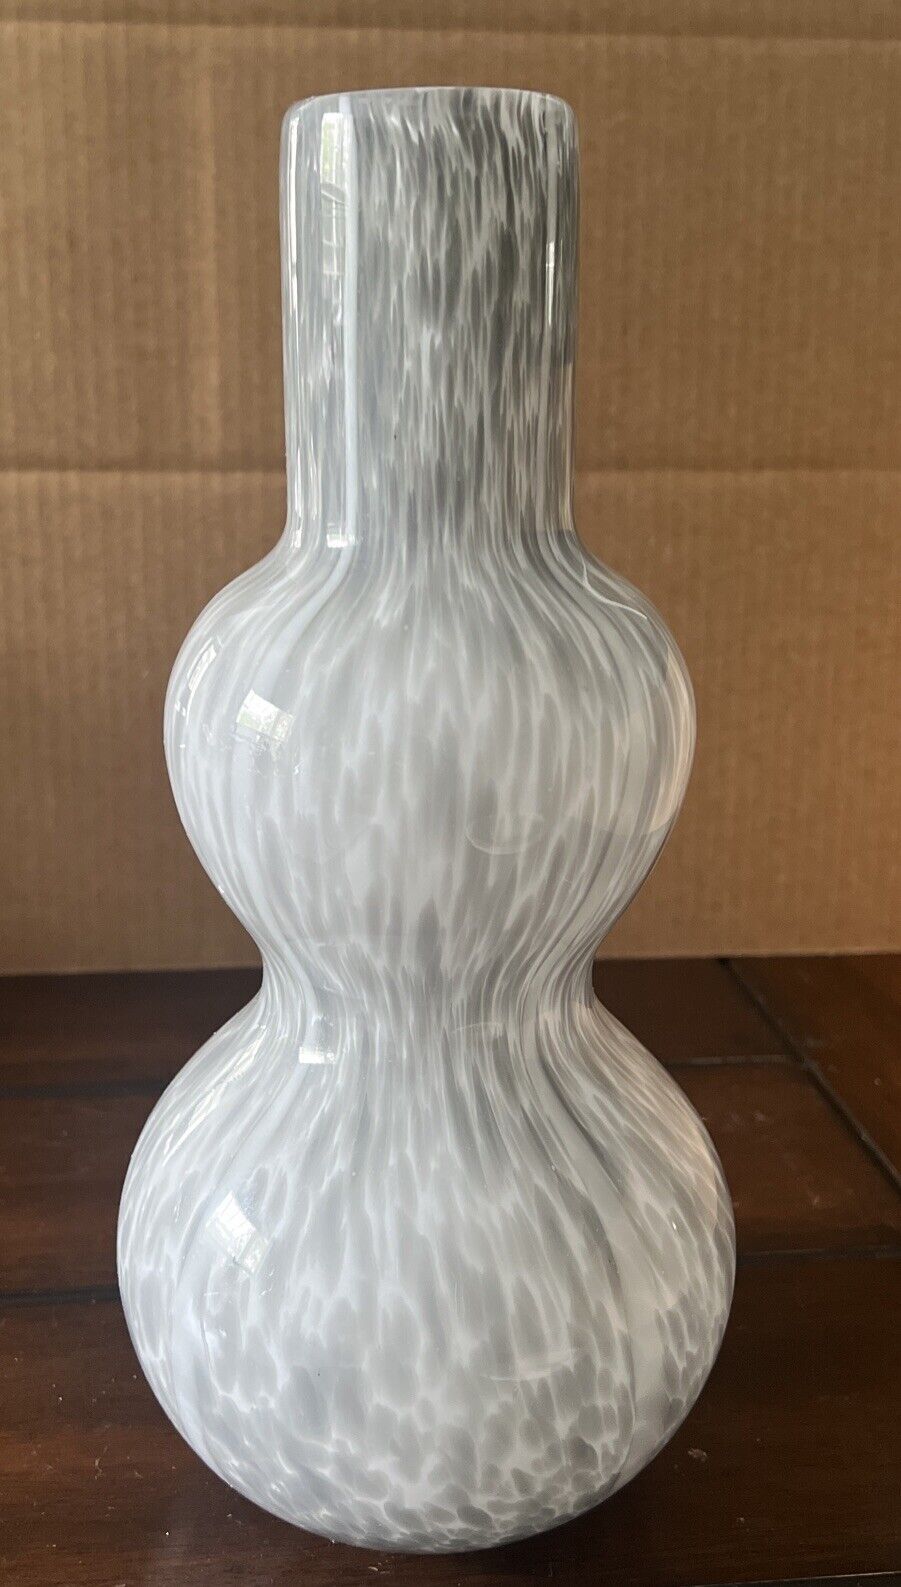 GLOBAL VIEWS STUNNING DOUBLE LAYER 12” Tall Art Glass BUBBLE VASE-Gray/White